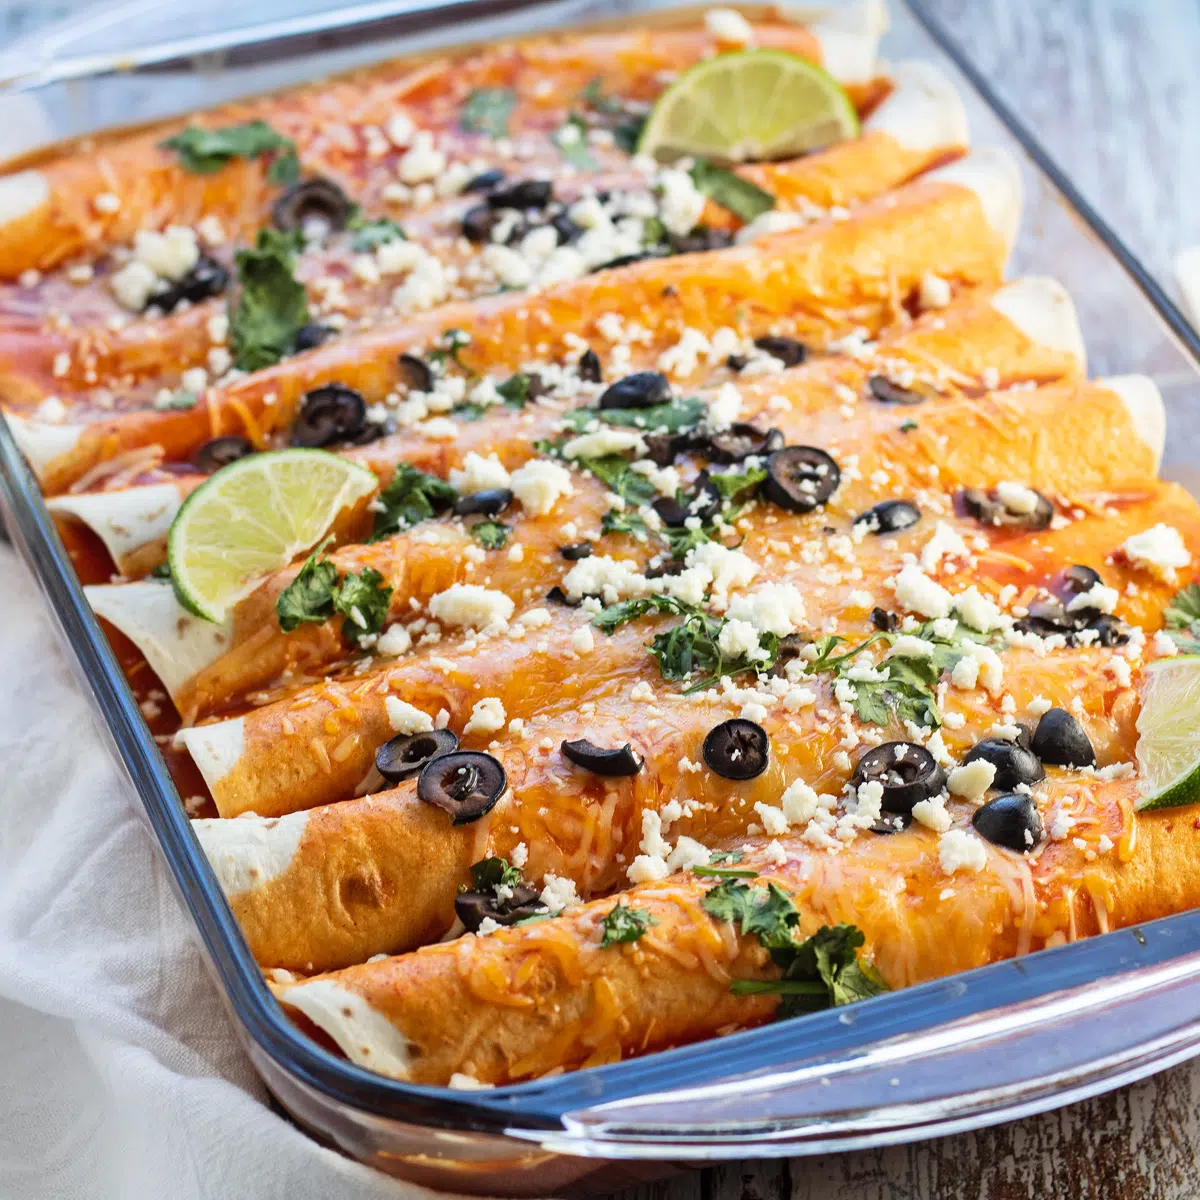 Baked cheese enchiladas topped with more cheese, queso fresco, sliced olives, and cilantro.